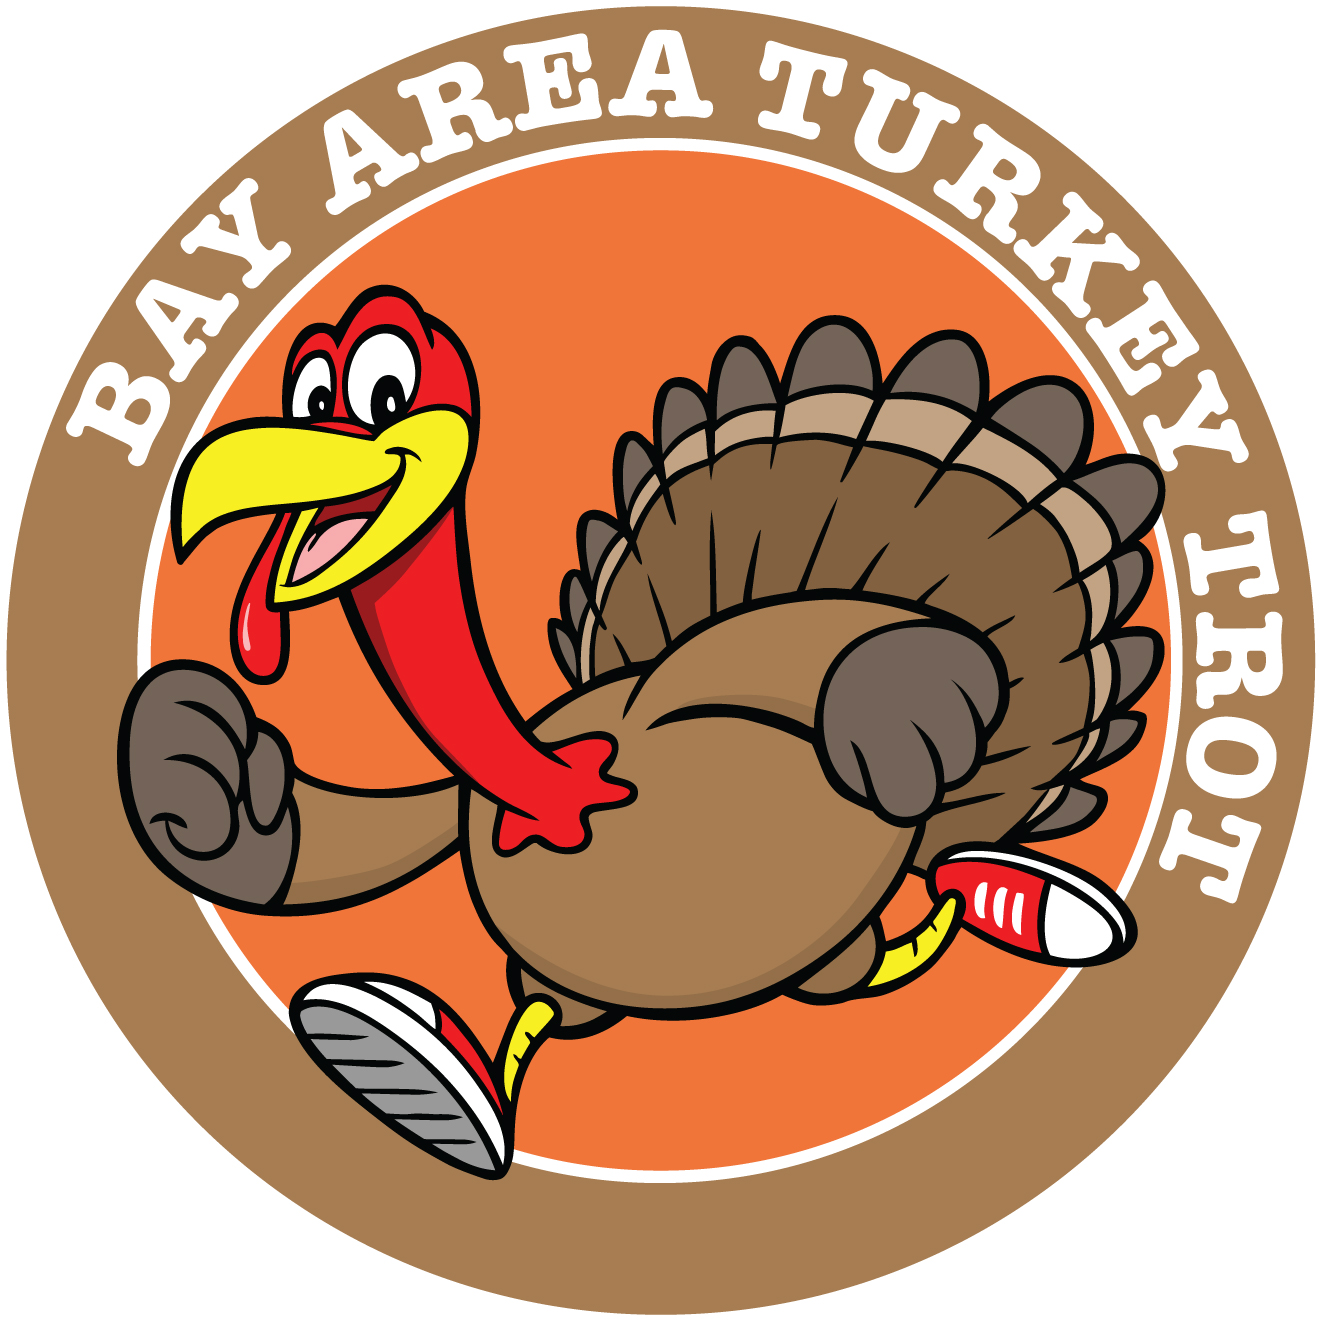 Bay Area Turkey Day 2020 Results